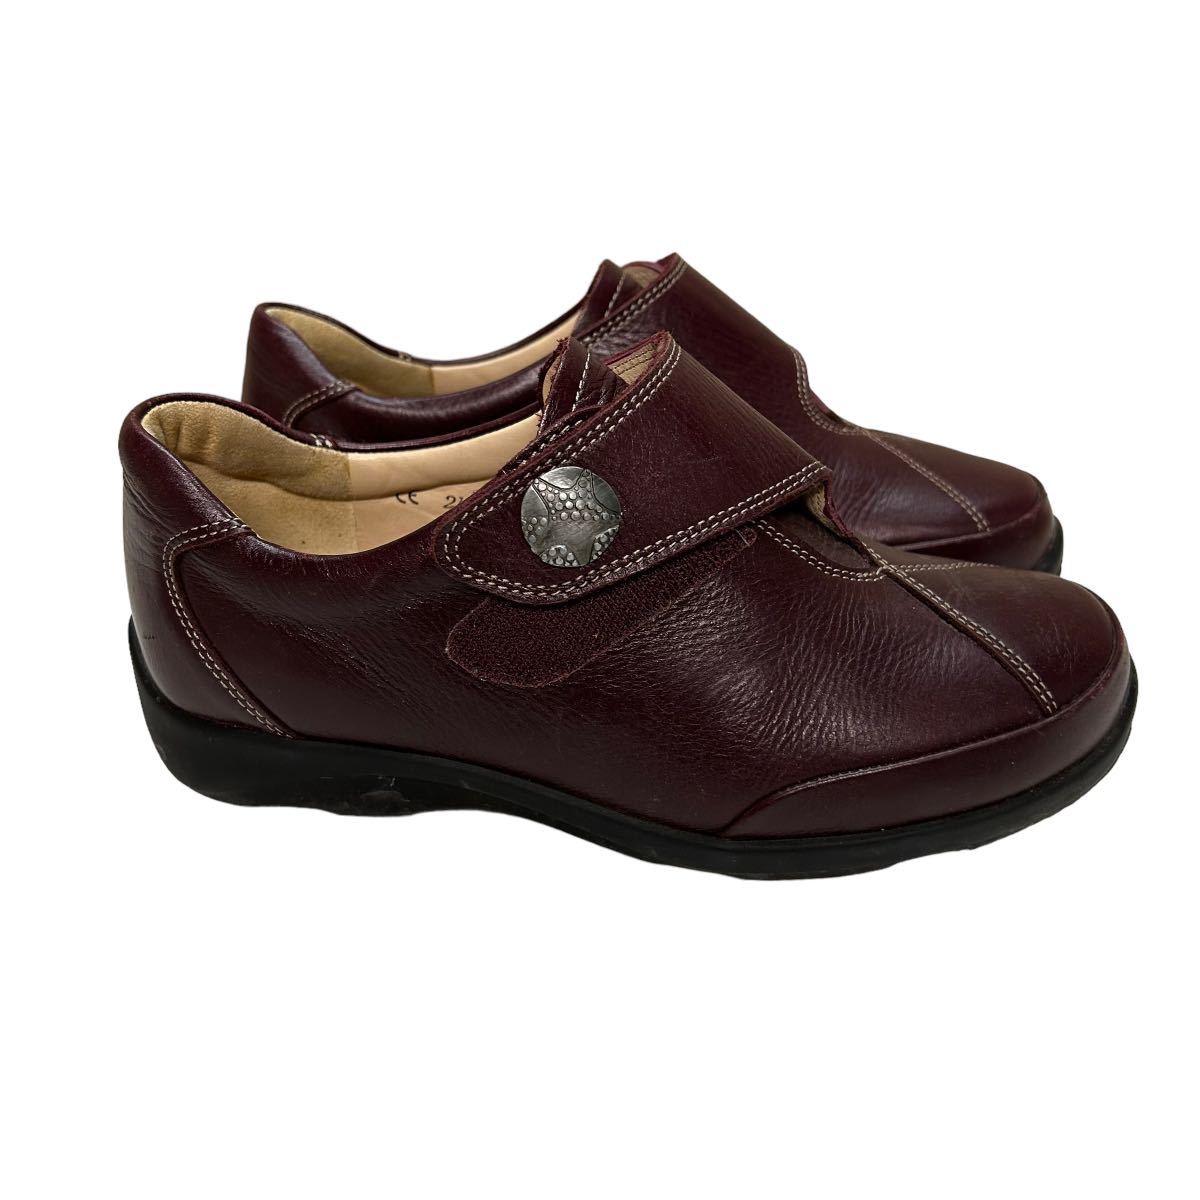 BB292 Finn Comfort fins comfort lady's walking shoes 3.5 approximately 22cm bordeaux leather velcro Germany made excellent 